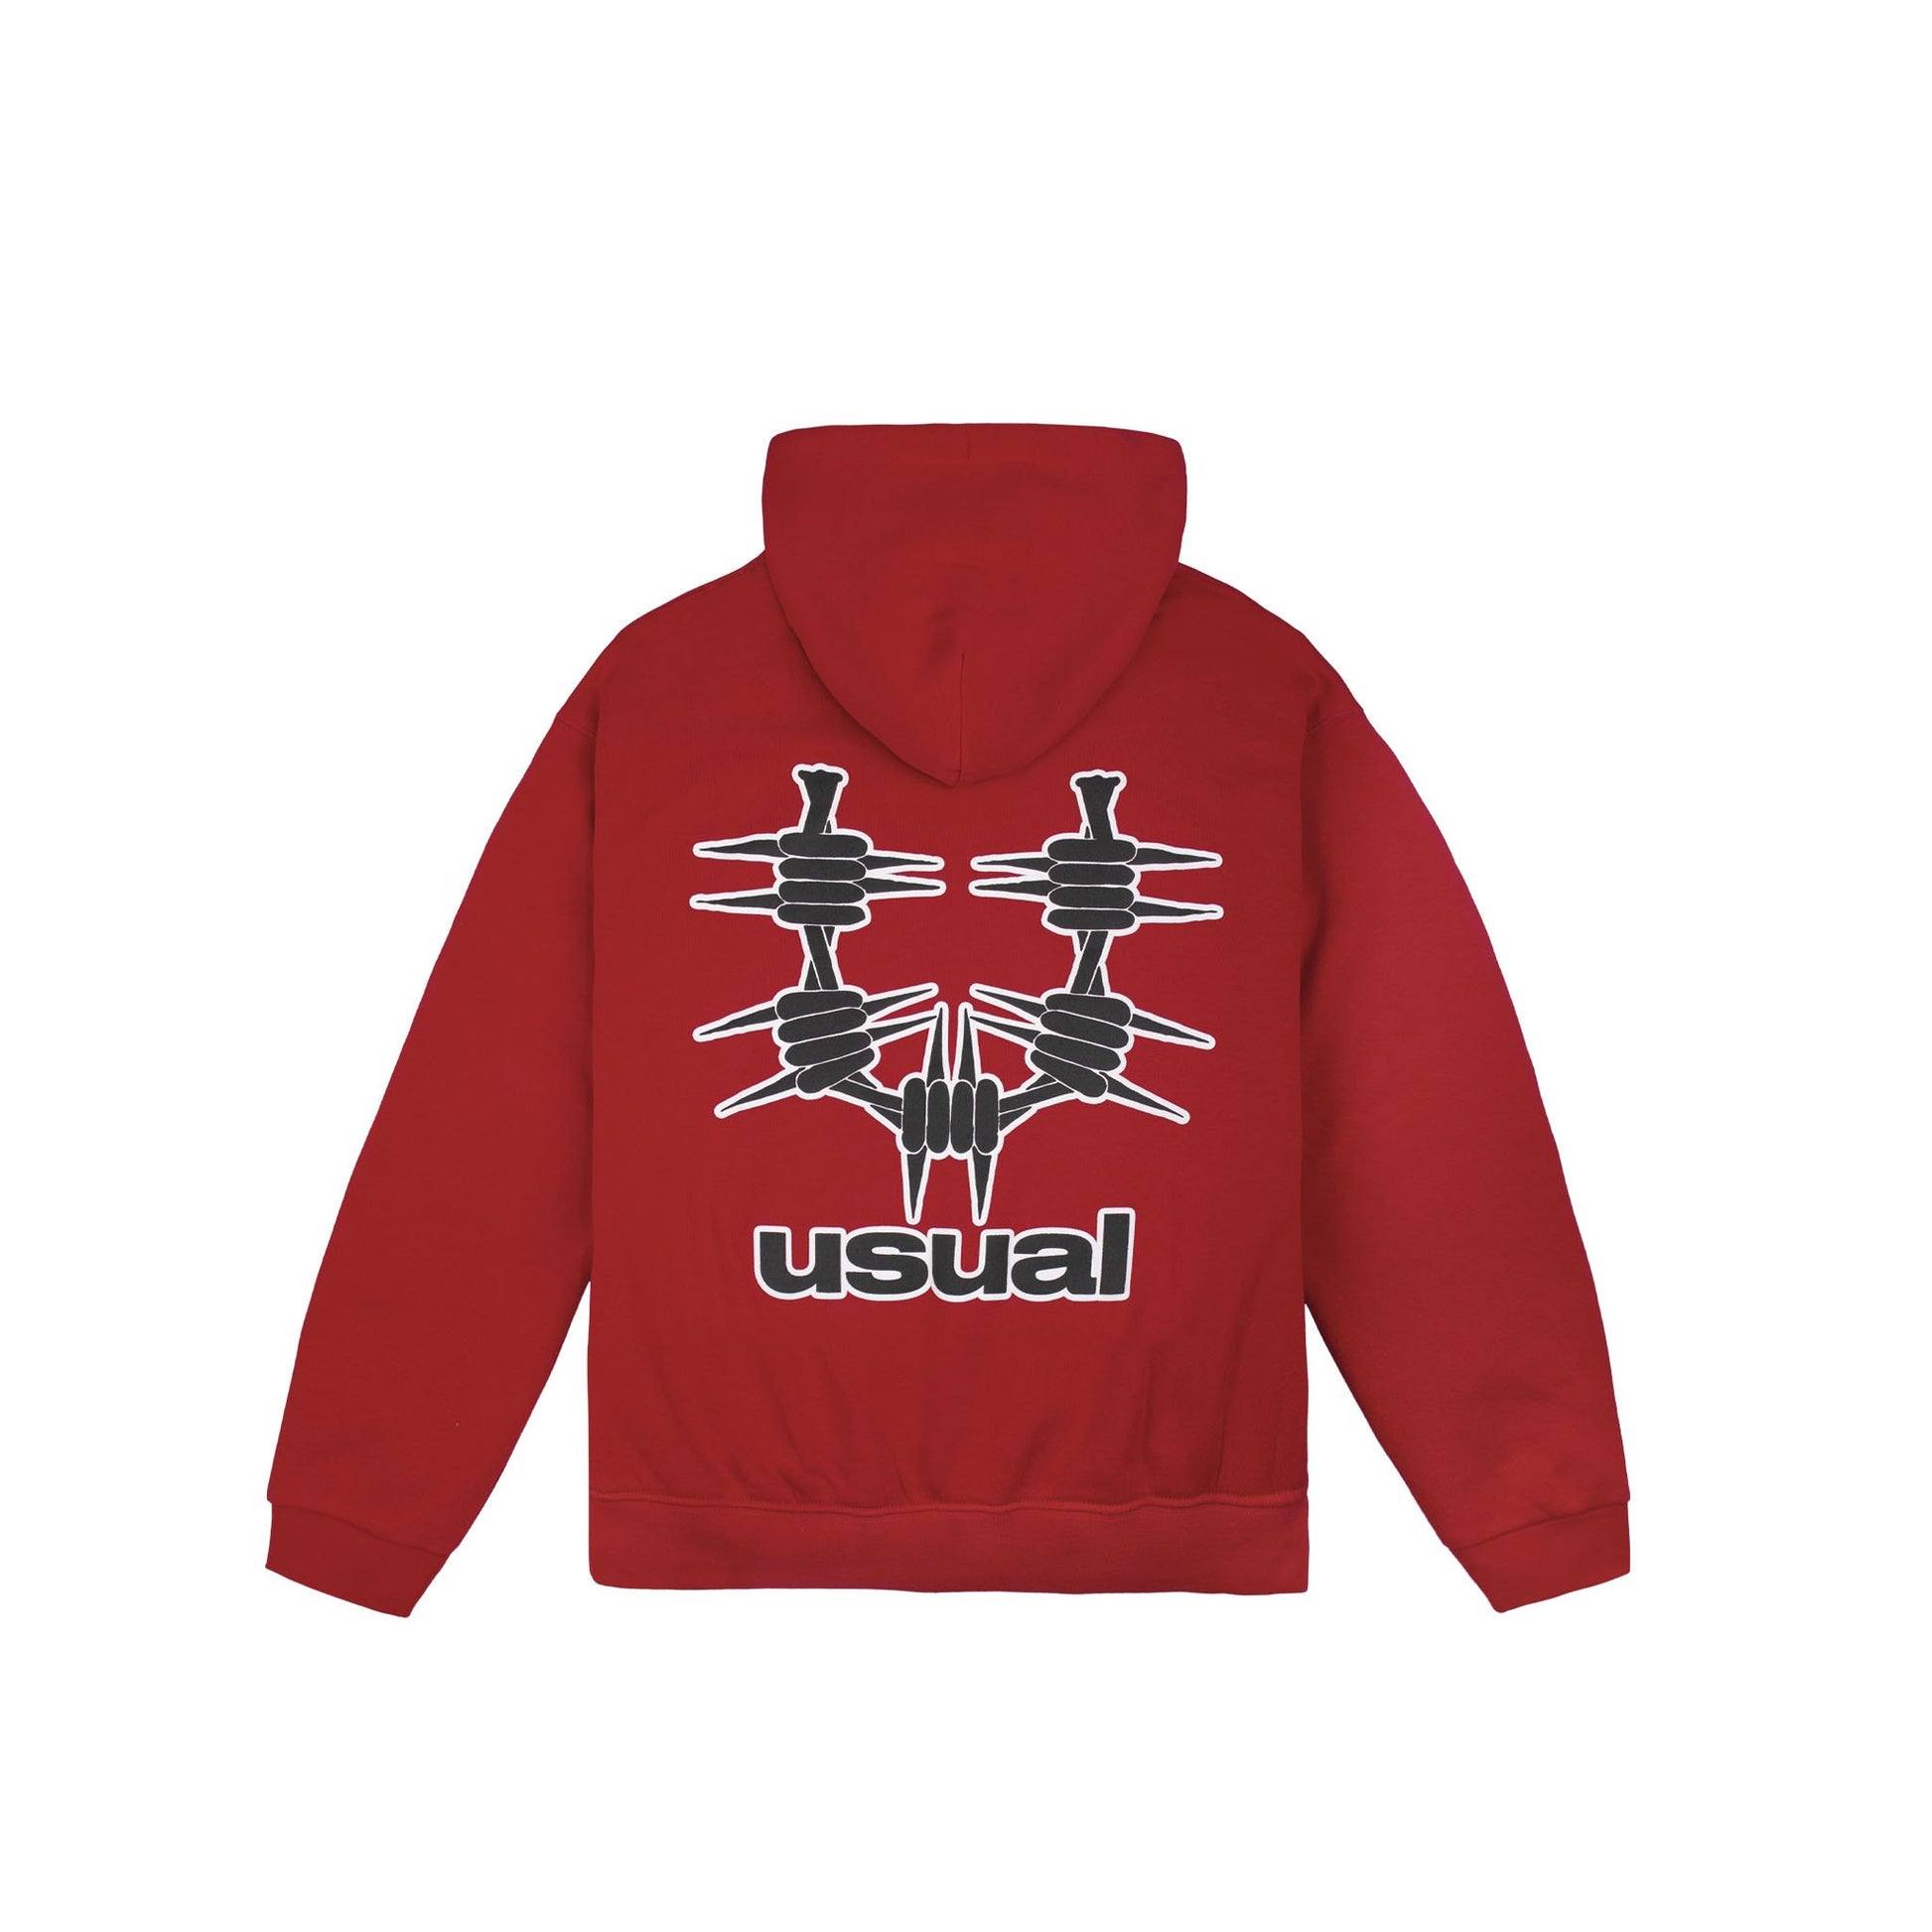 Usual - Outline Hoodie Red